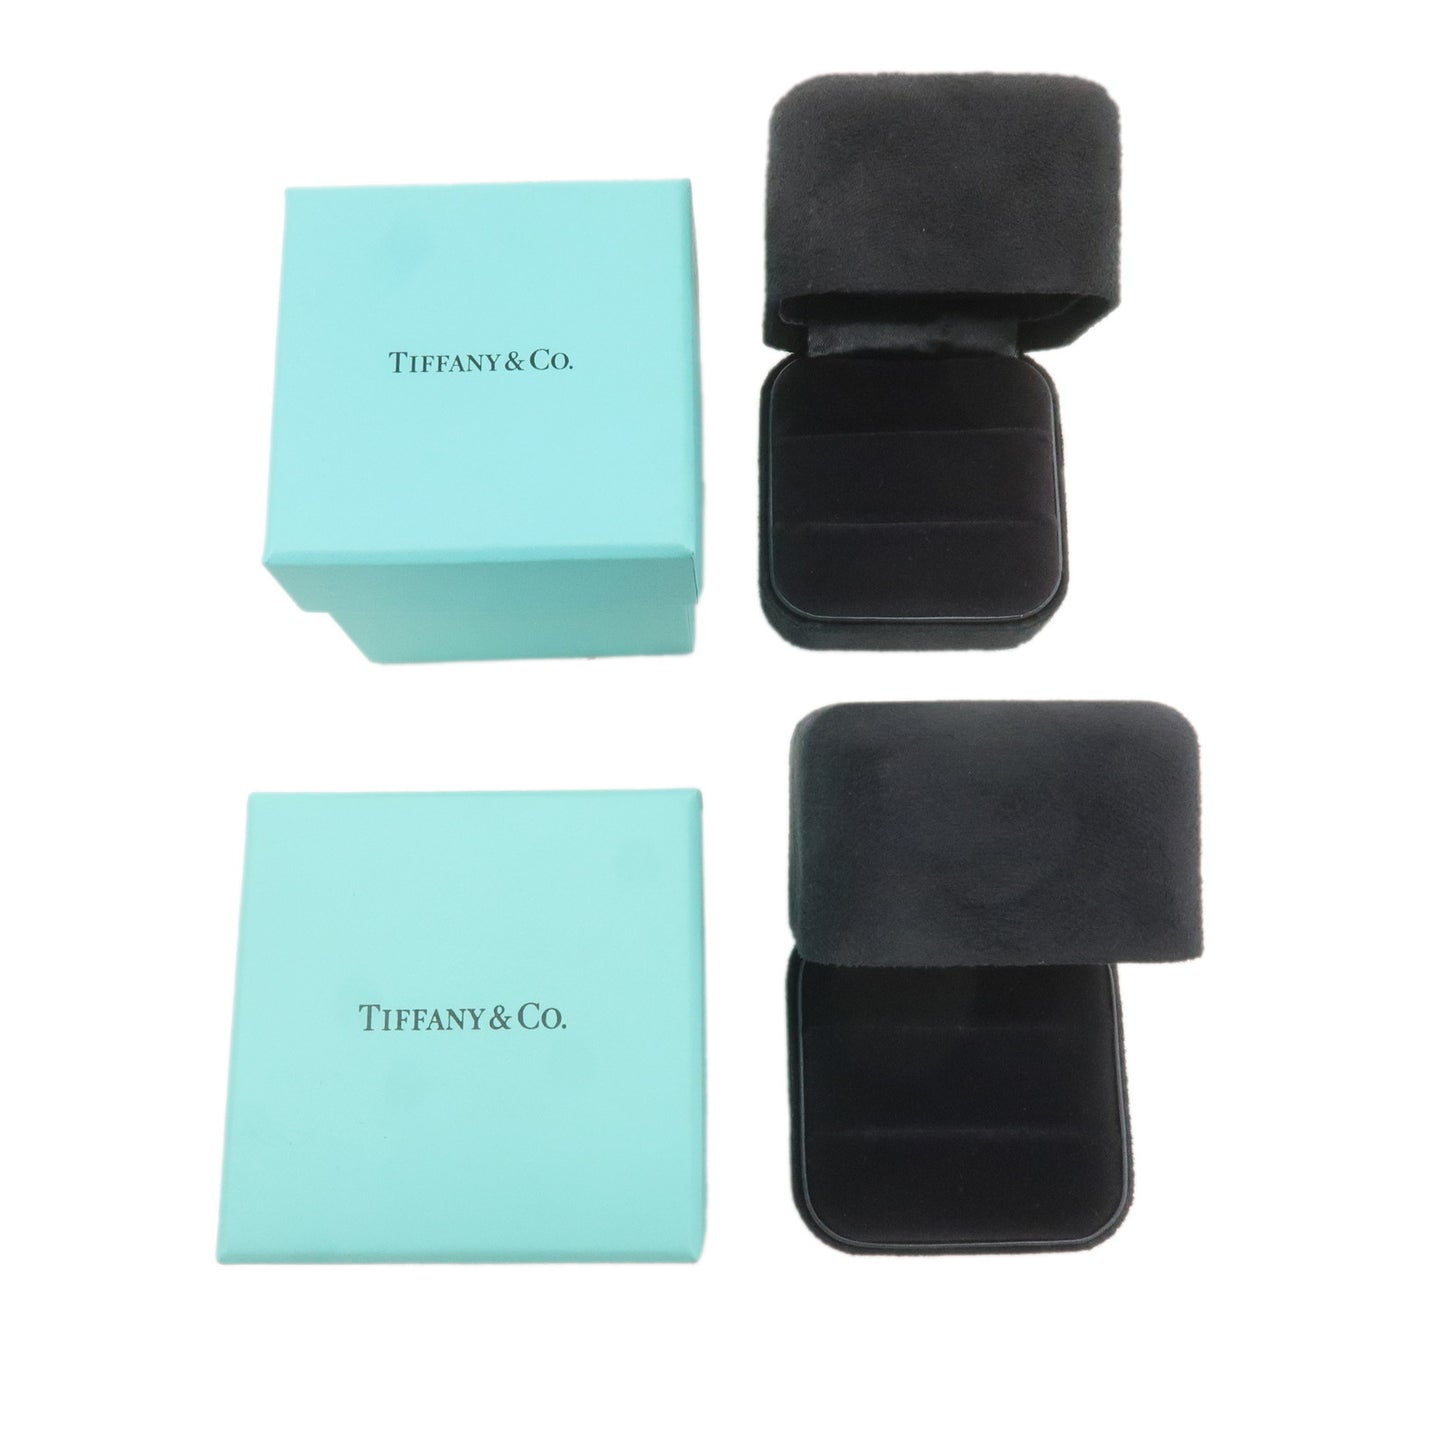 Tiffany&Co. Set of 2 Jewelry Box For Pair Rings Tiffany Blue